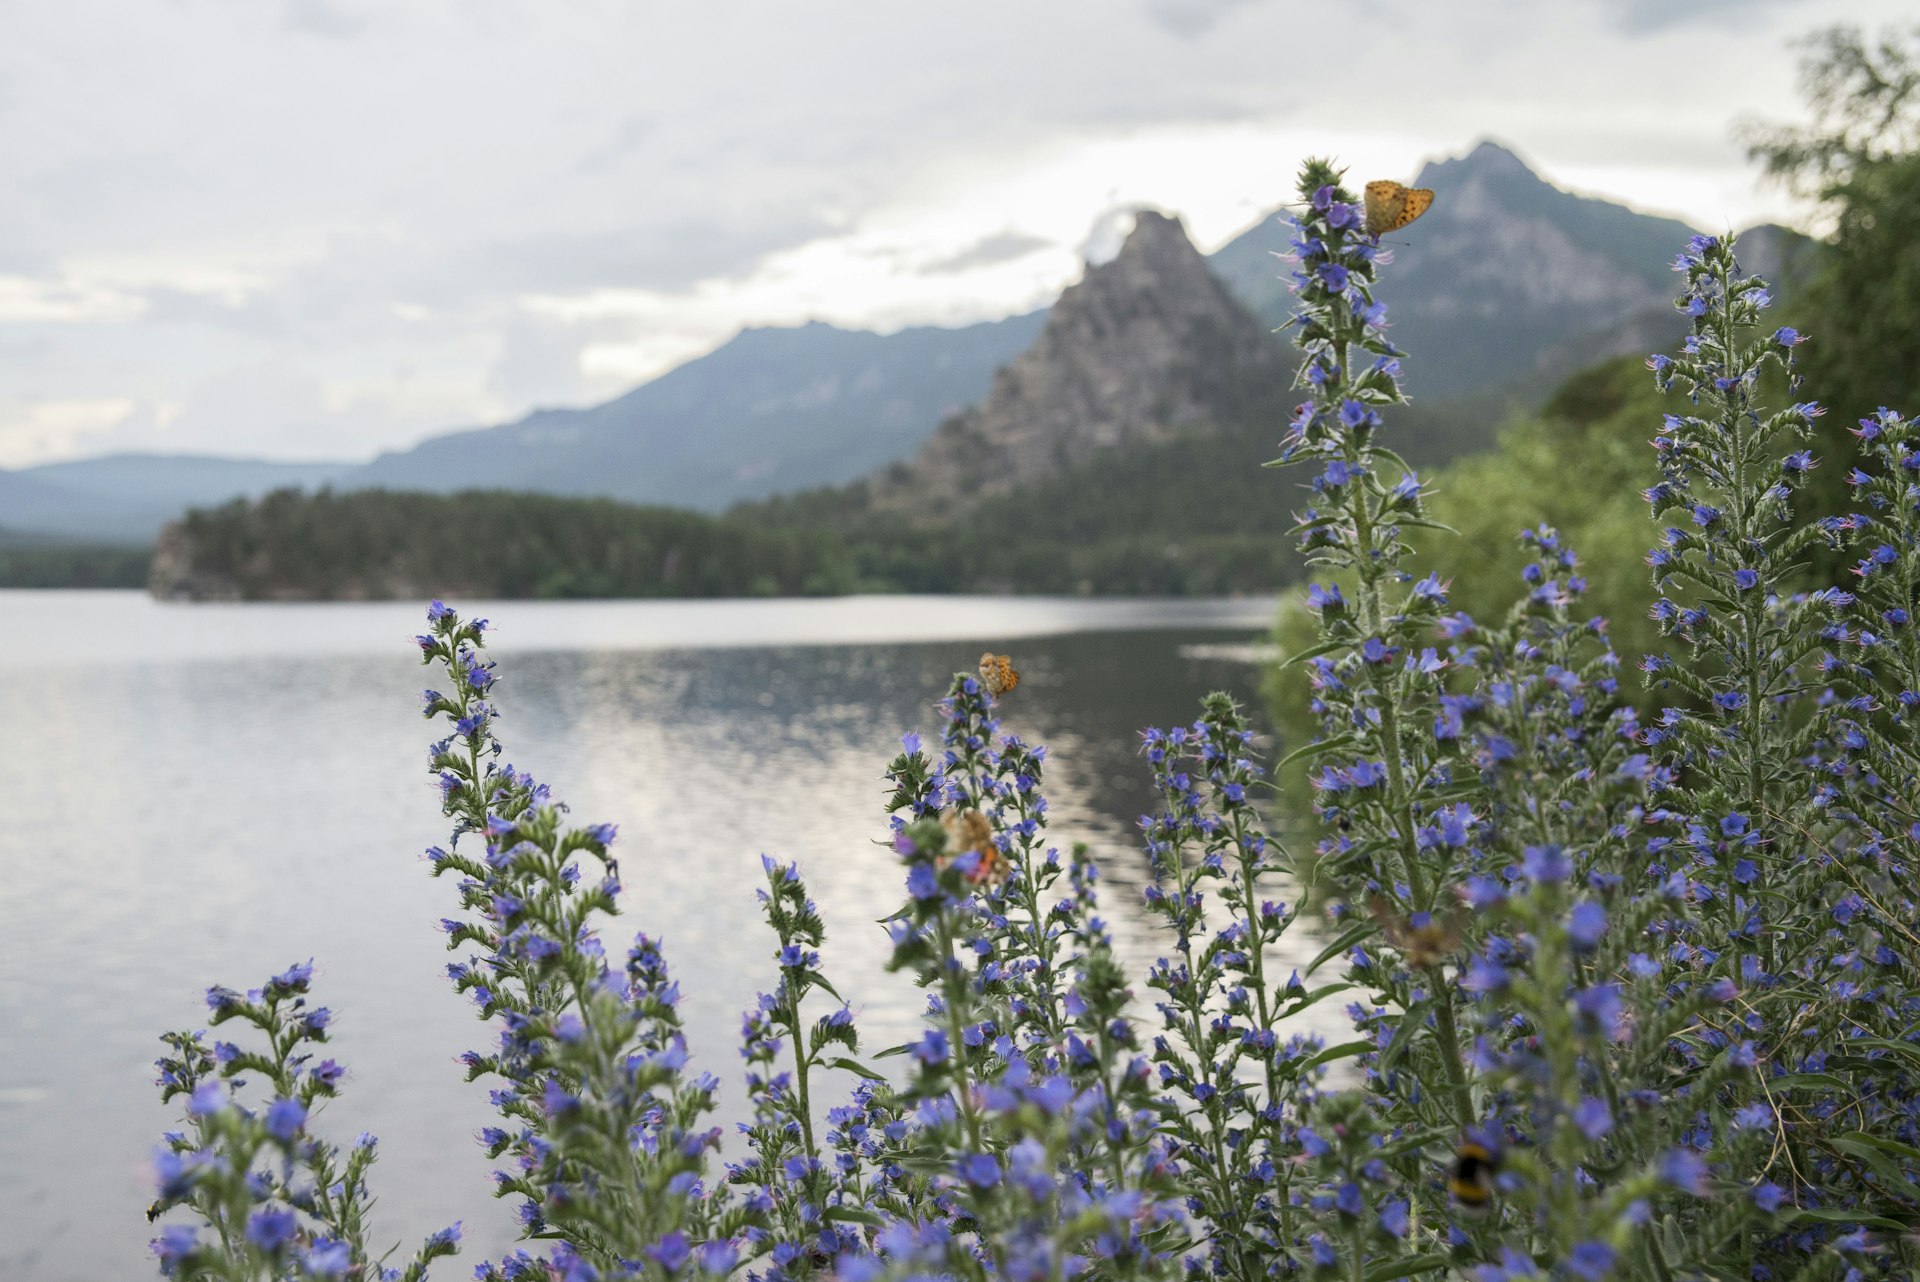 A view of flowers and a lake at Burabay National Park, Kazakhstan